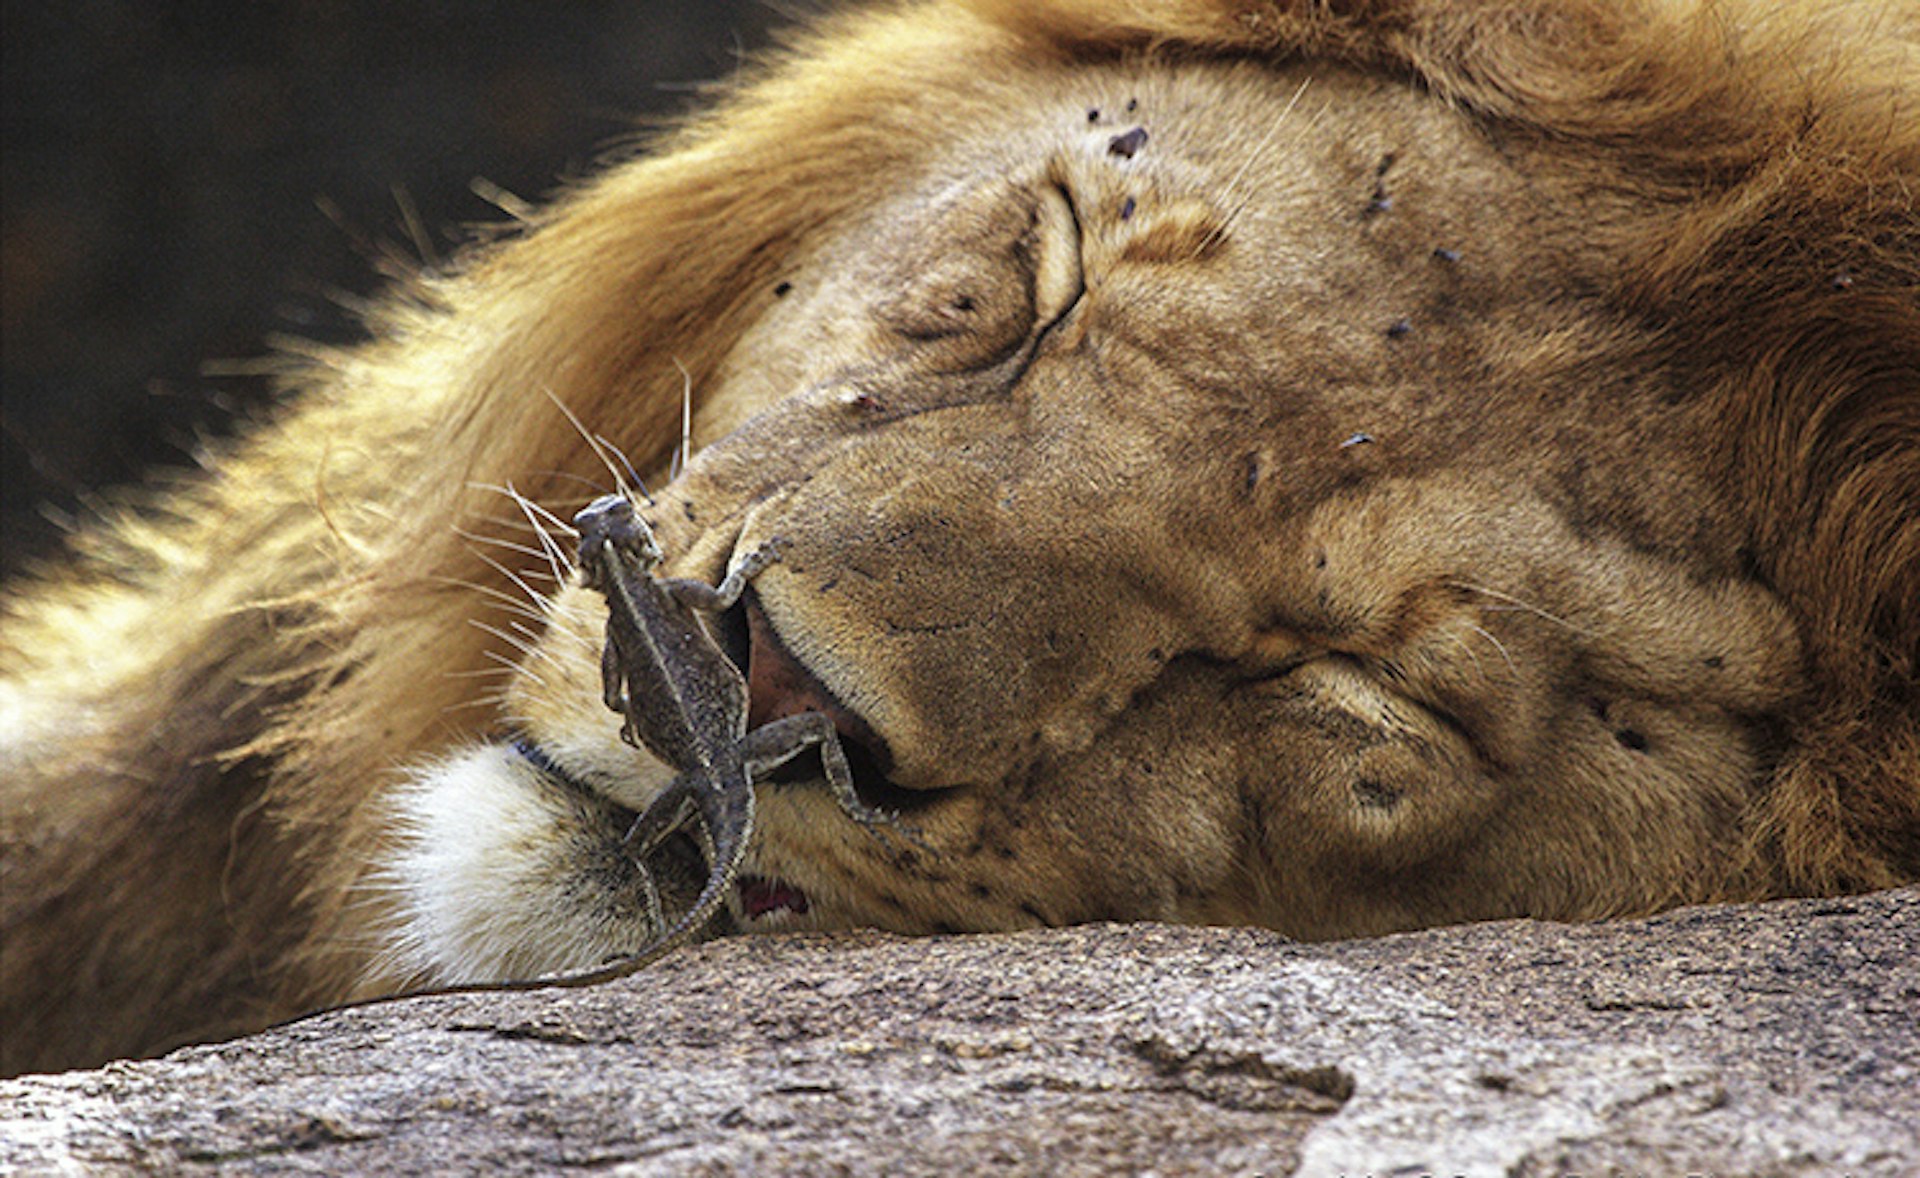 Lion asleep with lizard on nose.